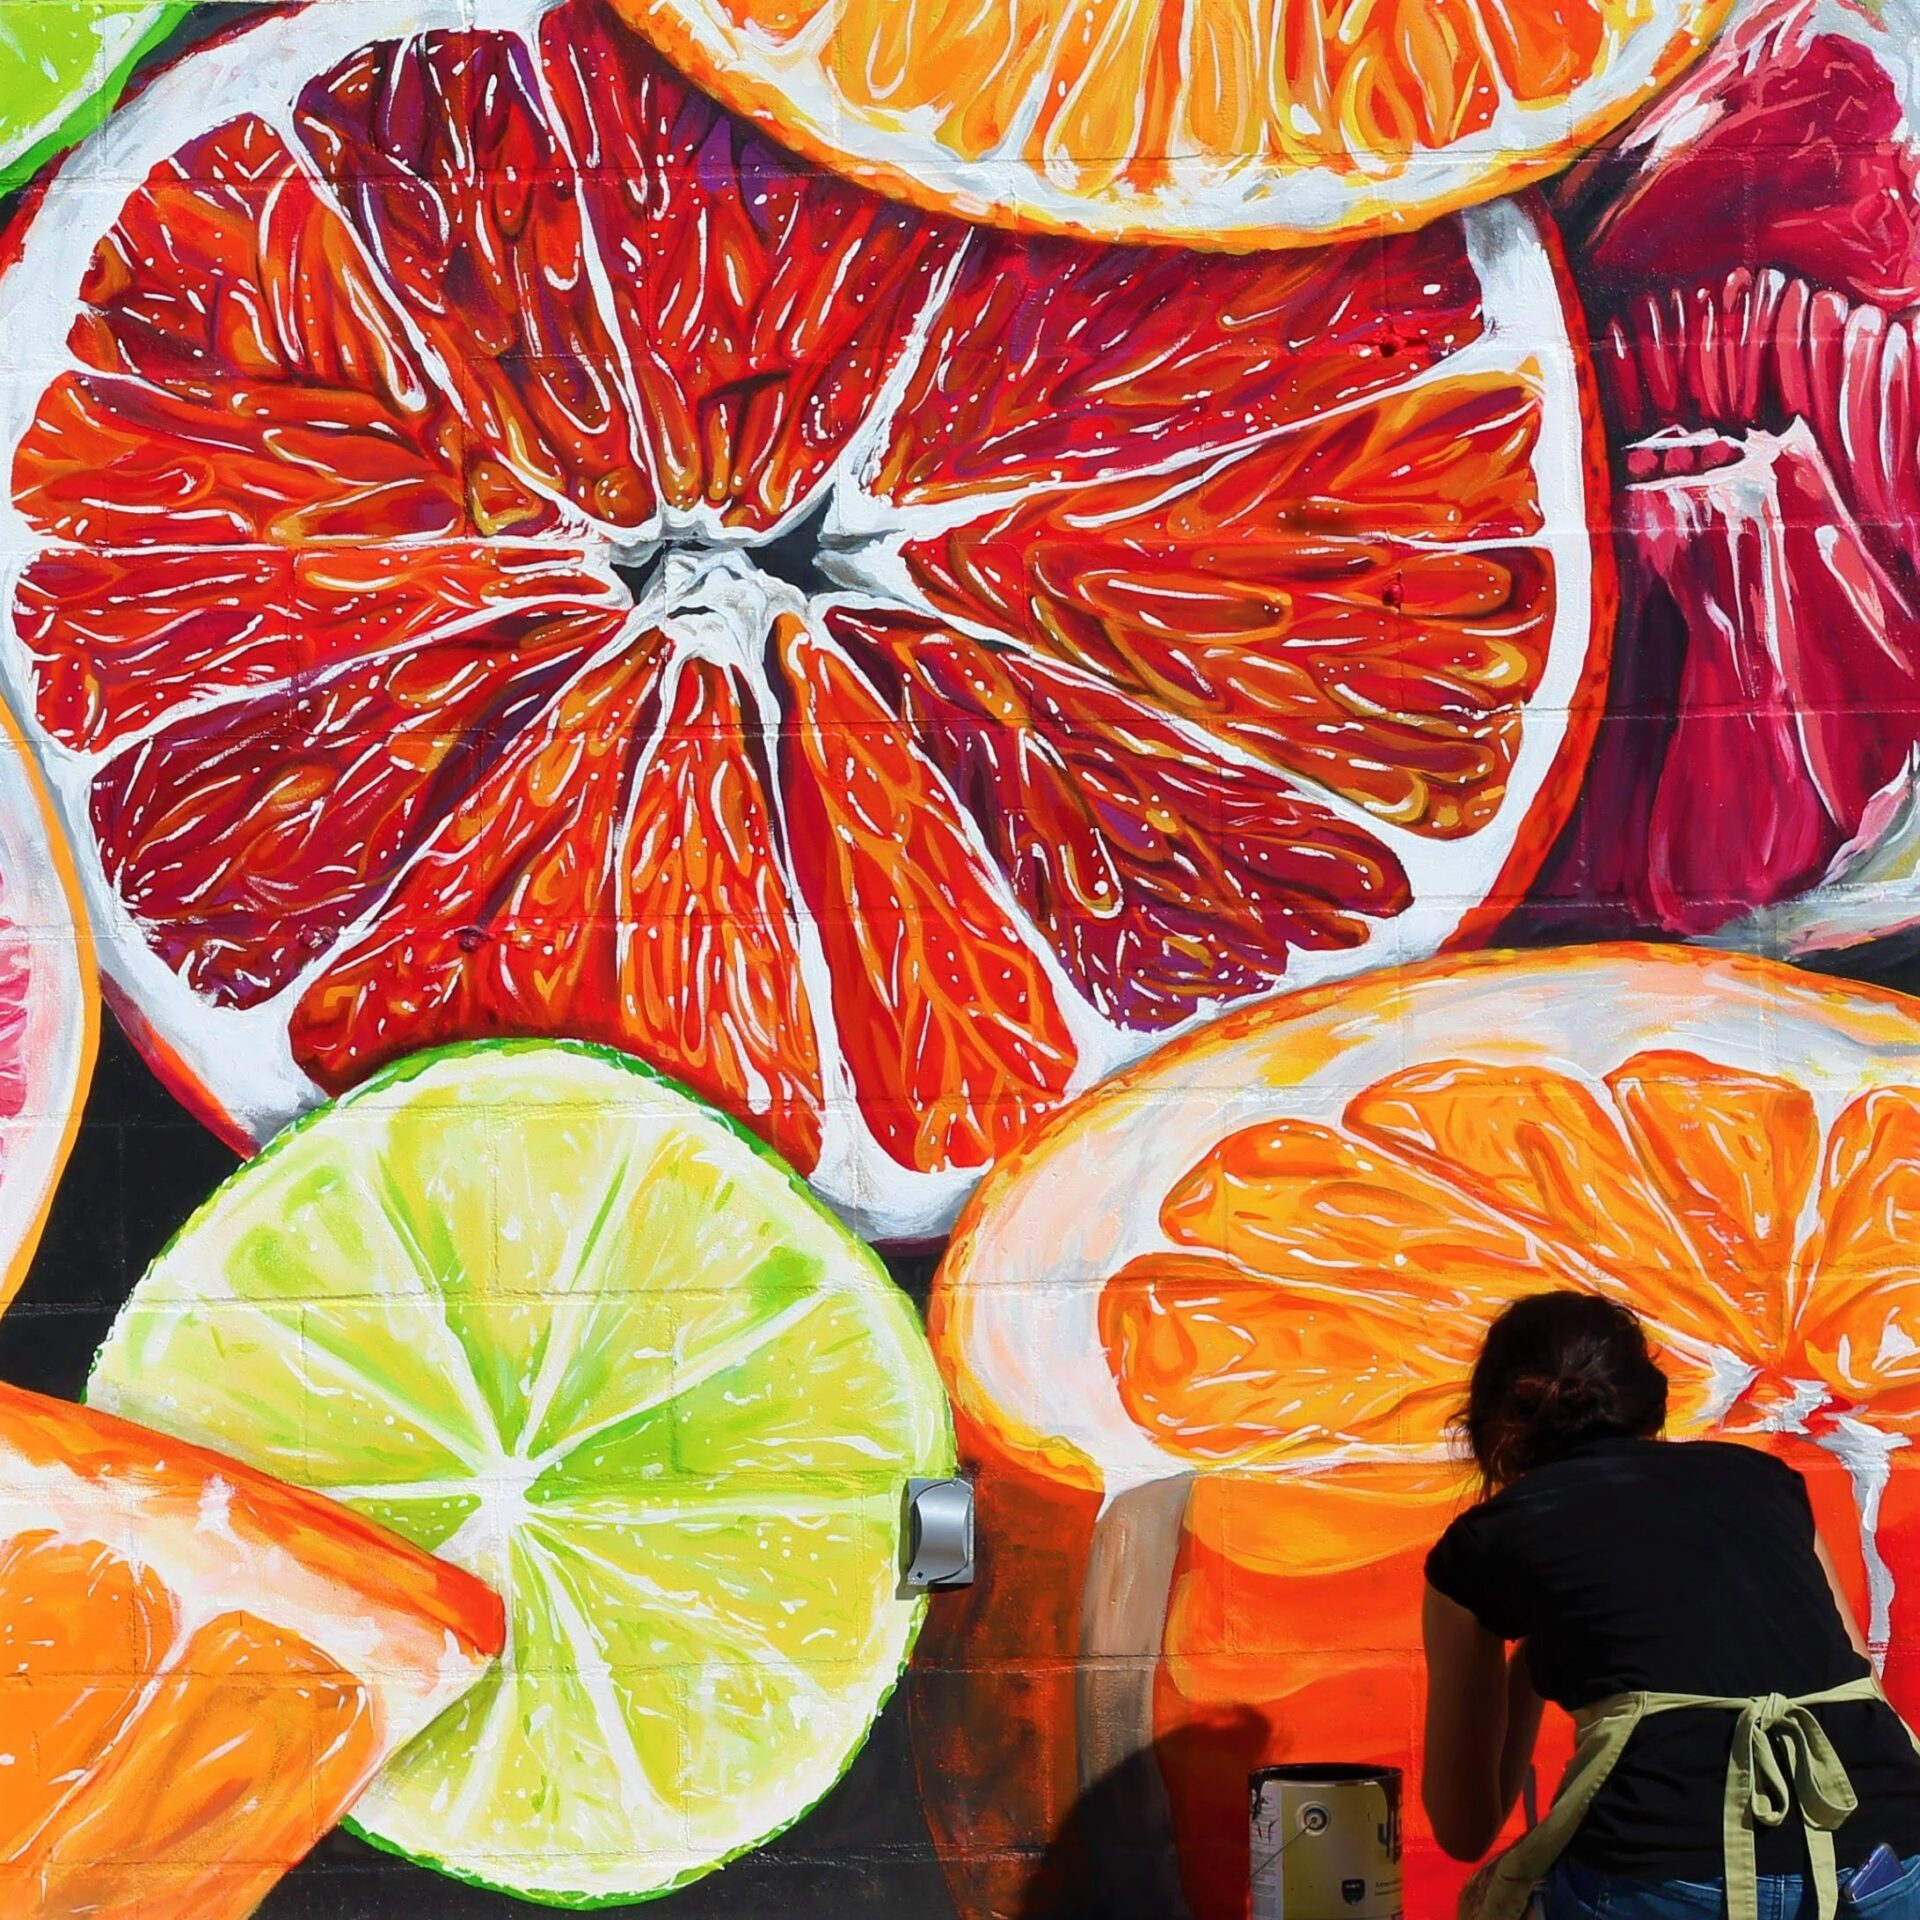 Citrus Medley mural for SHINE St. Petersburg Mural Festival at Greenbench Brewing, St. Pete, FL.